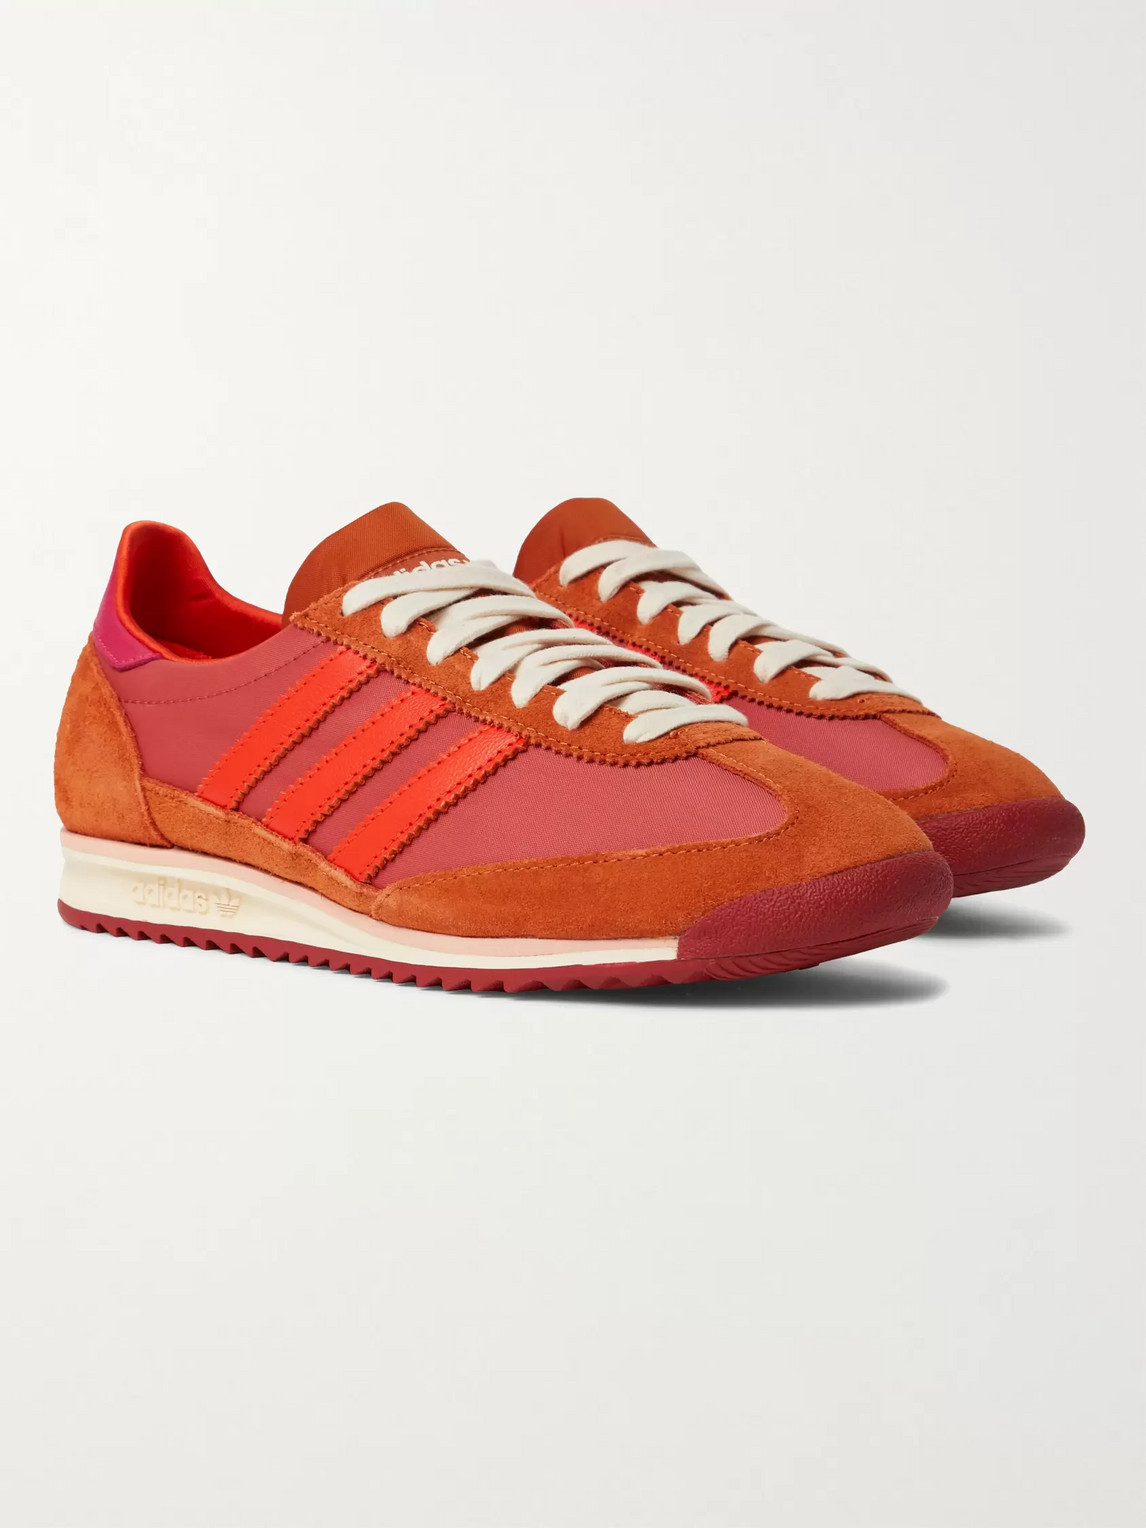 Adidas Consortium Wales Bonner Sl72 Shell, Leather And Suede Sneakers In Pink